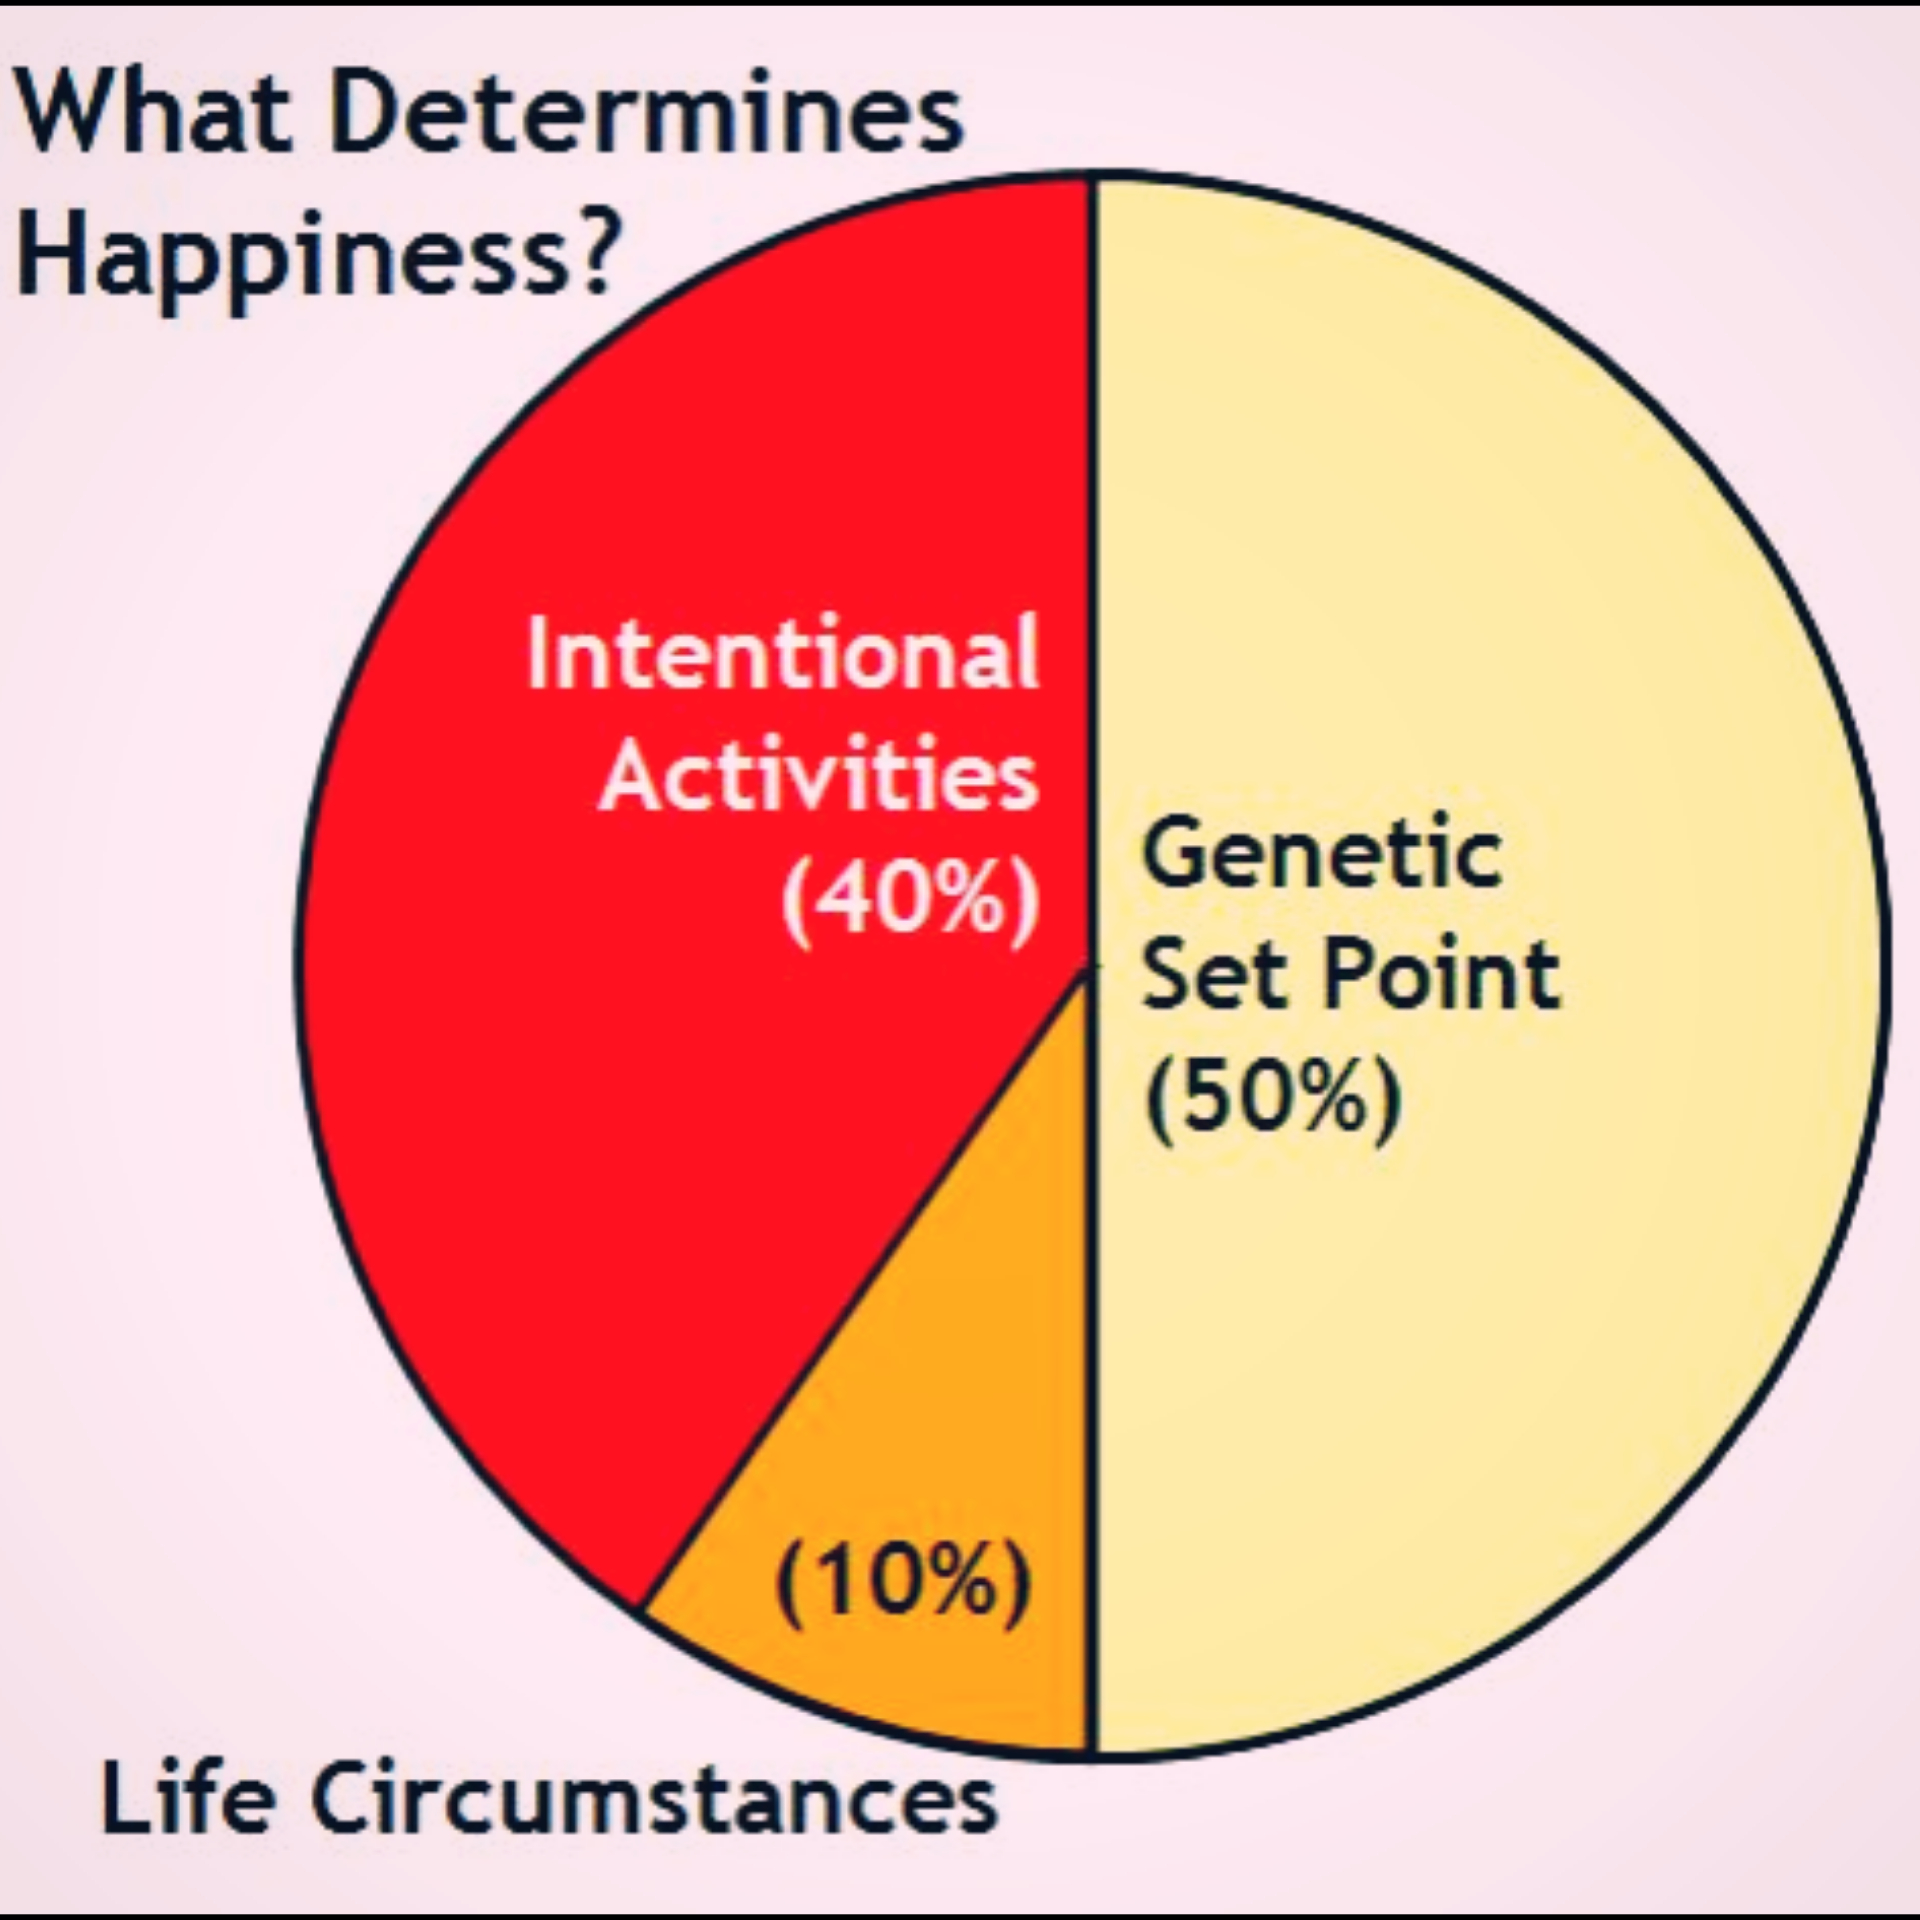 research on happiness suggests that